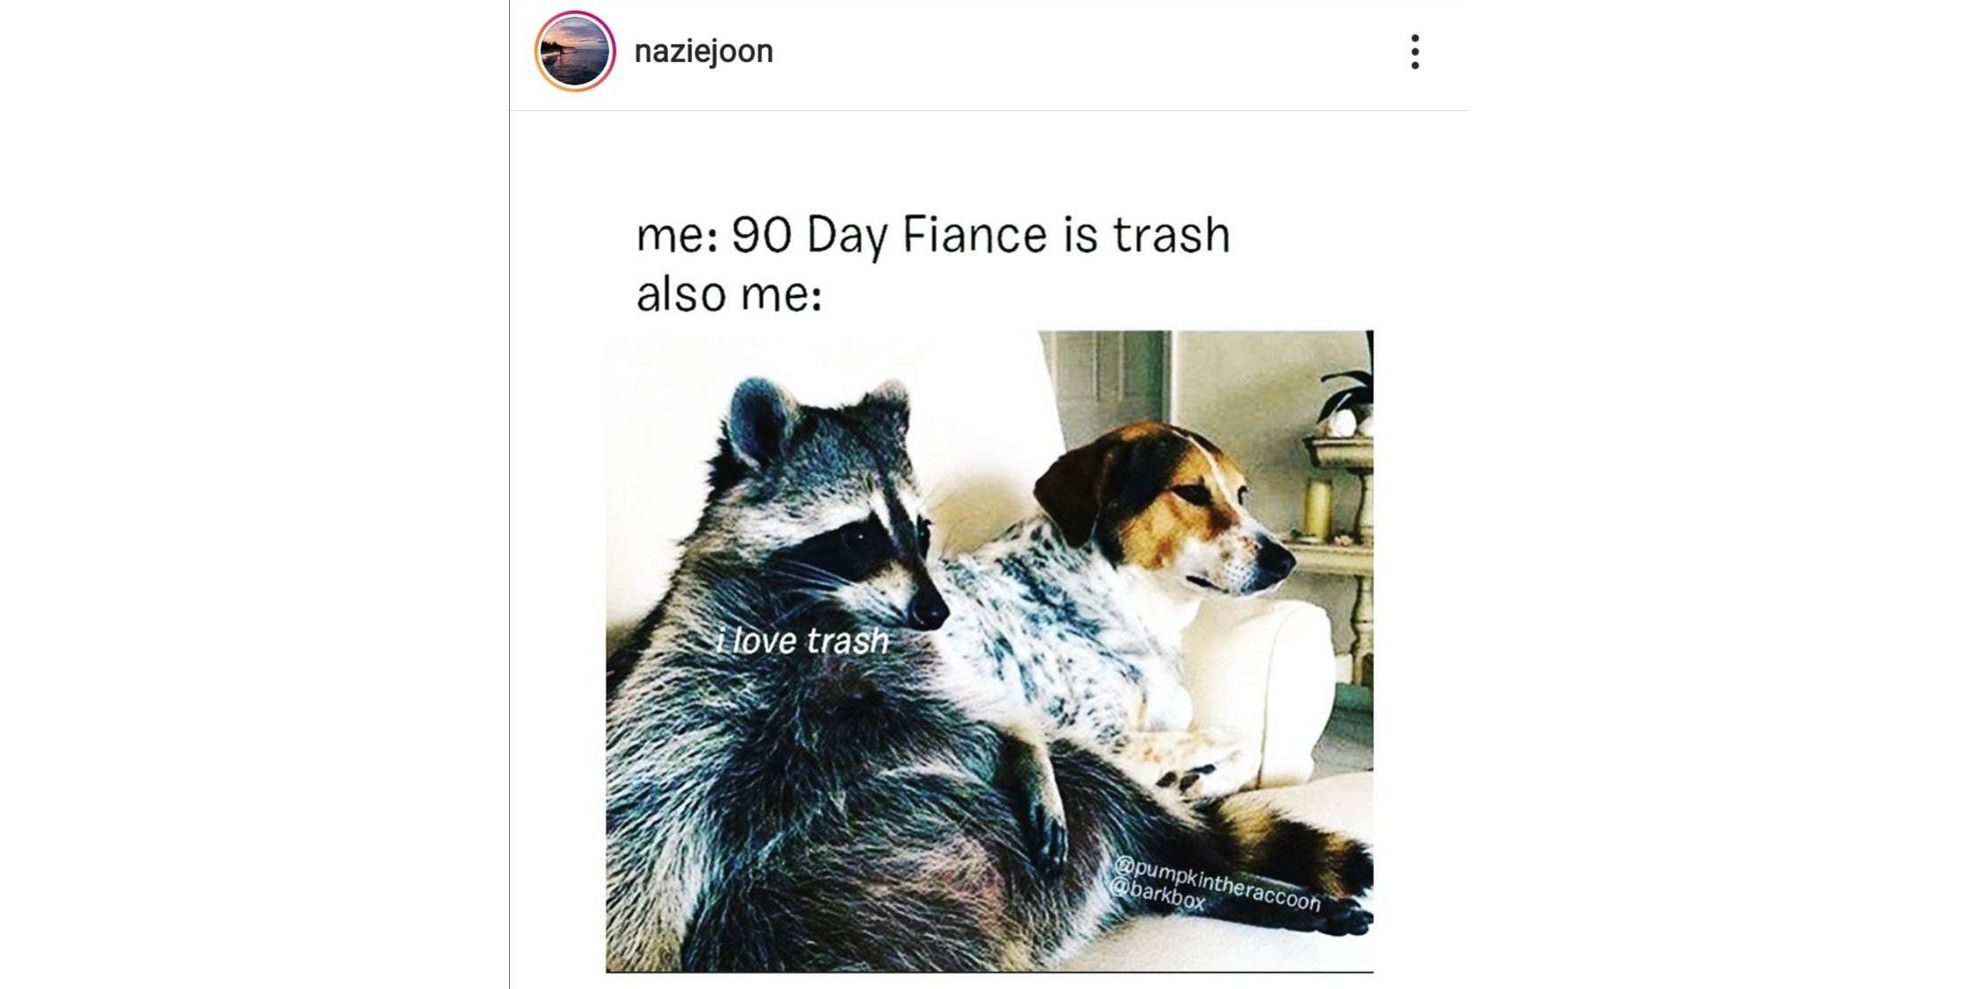 A raccoon and a dog sit side by side in a meme about 90 Day Fiance.